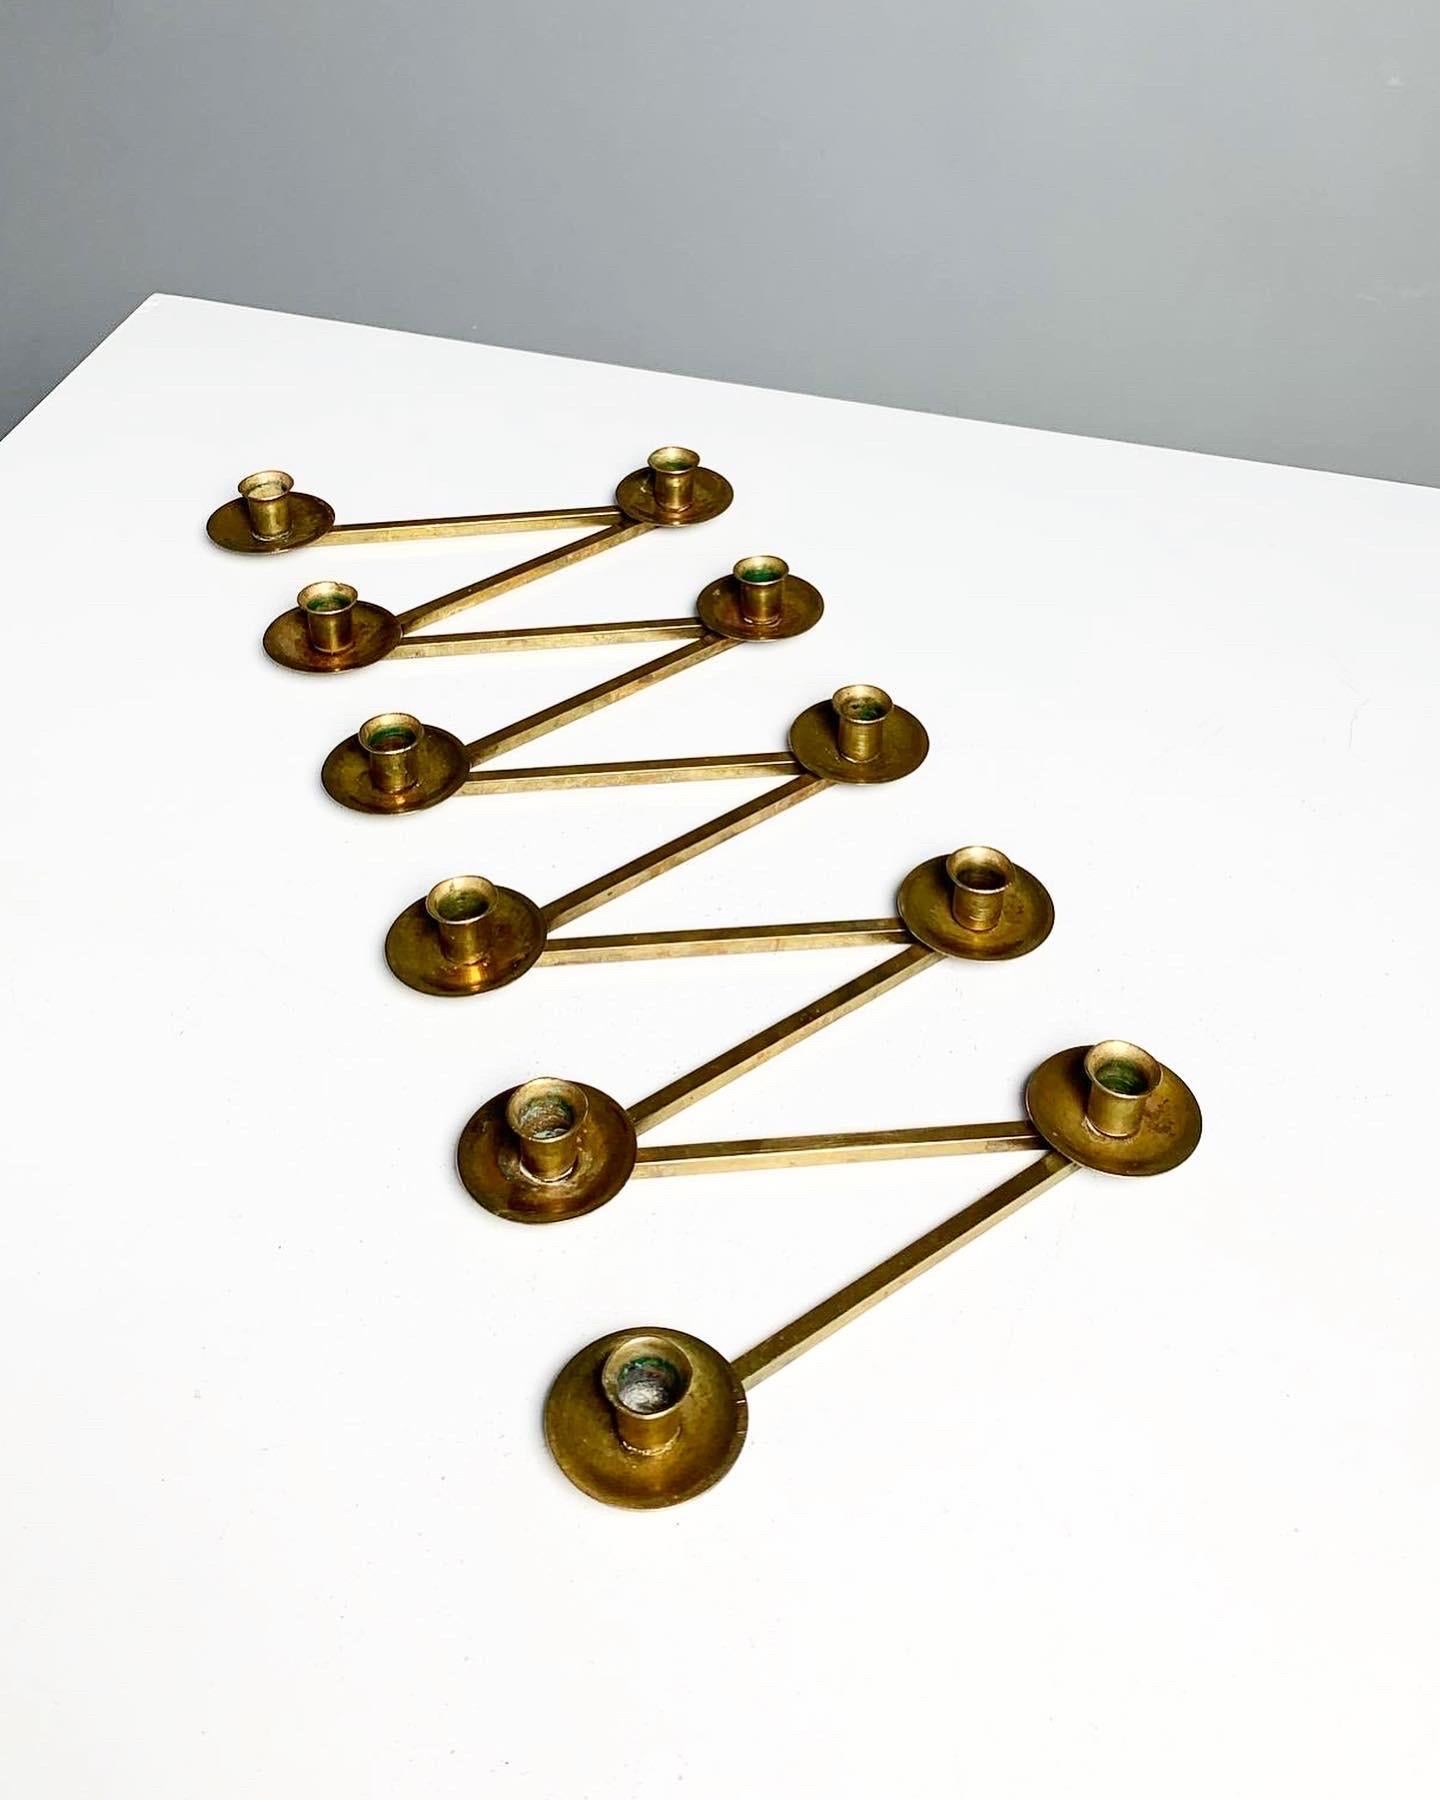 Lars Holmström Margareta Candelabra Brass Arvika 1950s
CHF290Price

Lars Holmström ‚Margareta Slingan’ brass candelabra for Arvika, made in Sweden in the 1950s.

Beautiful patina, for thin candles with a diameter of 12 mm. Marked „MADE IN